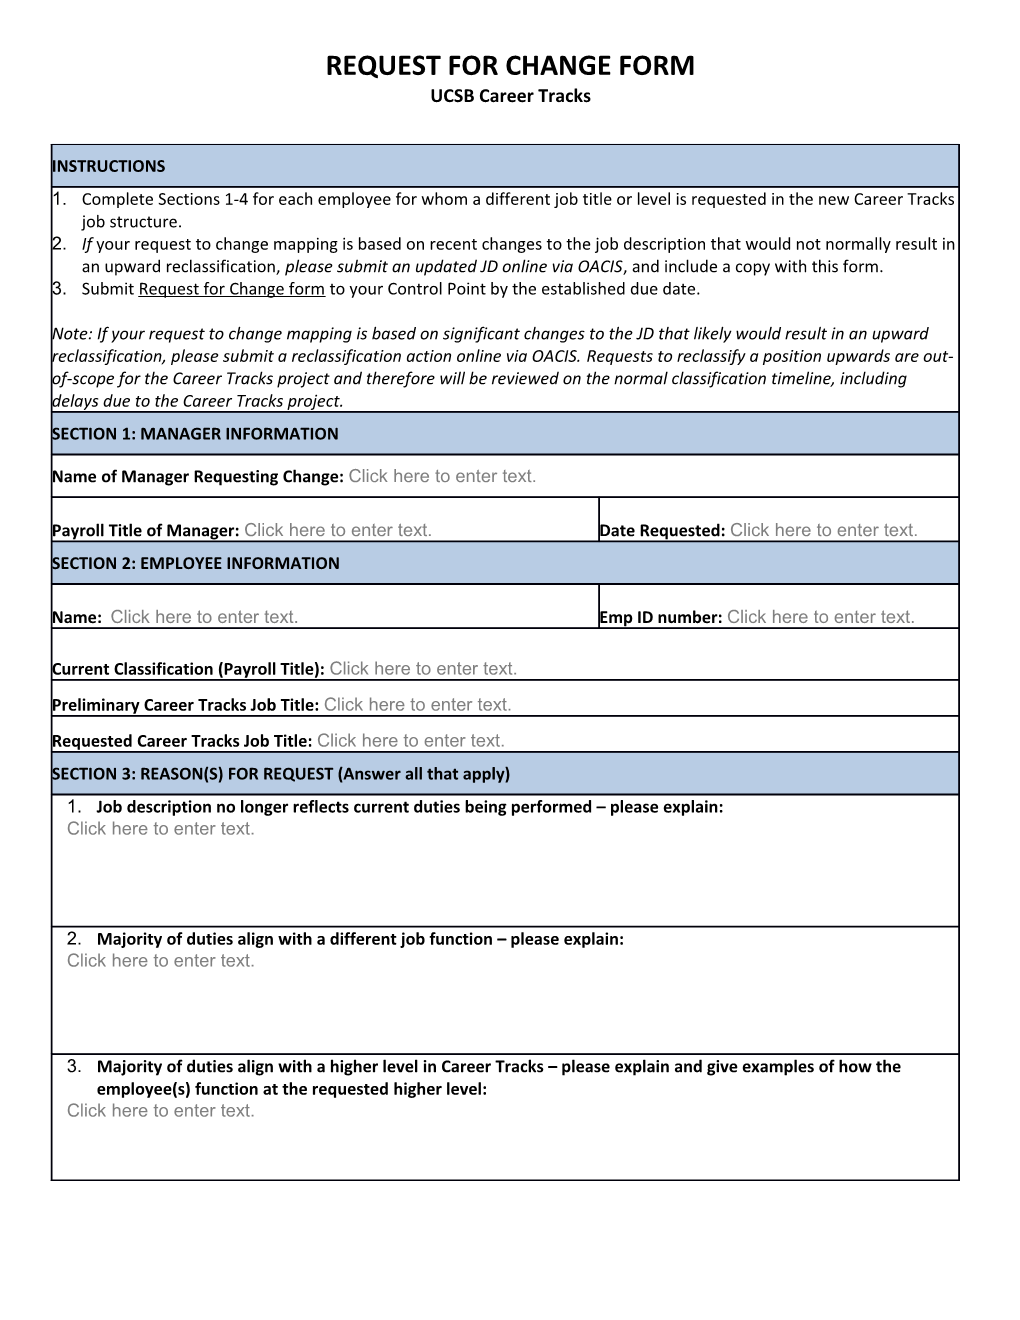 Request for Change Form